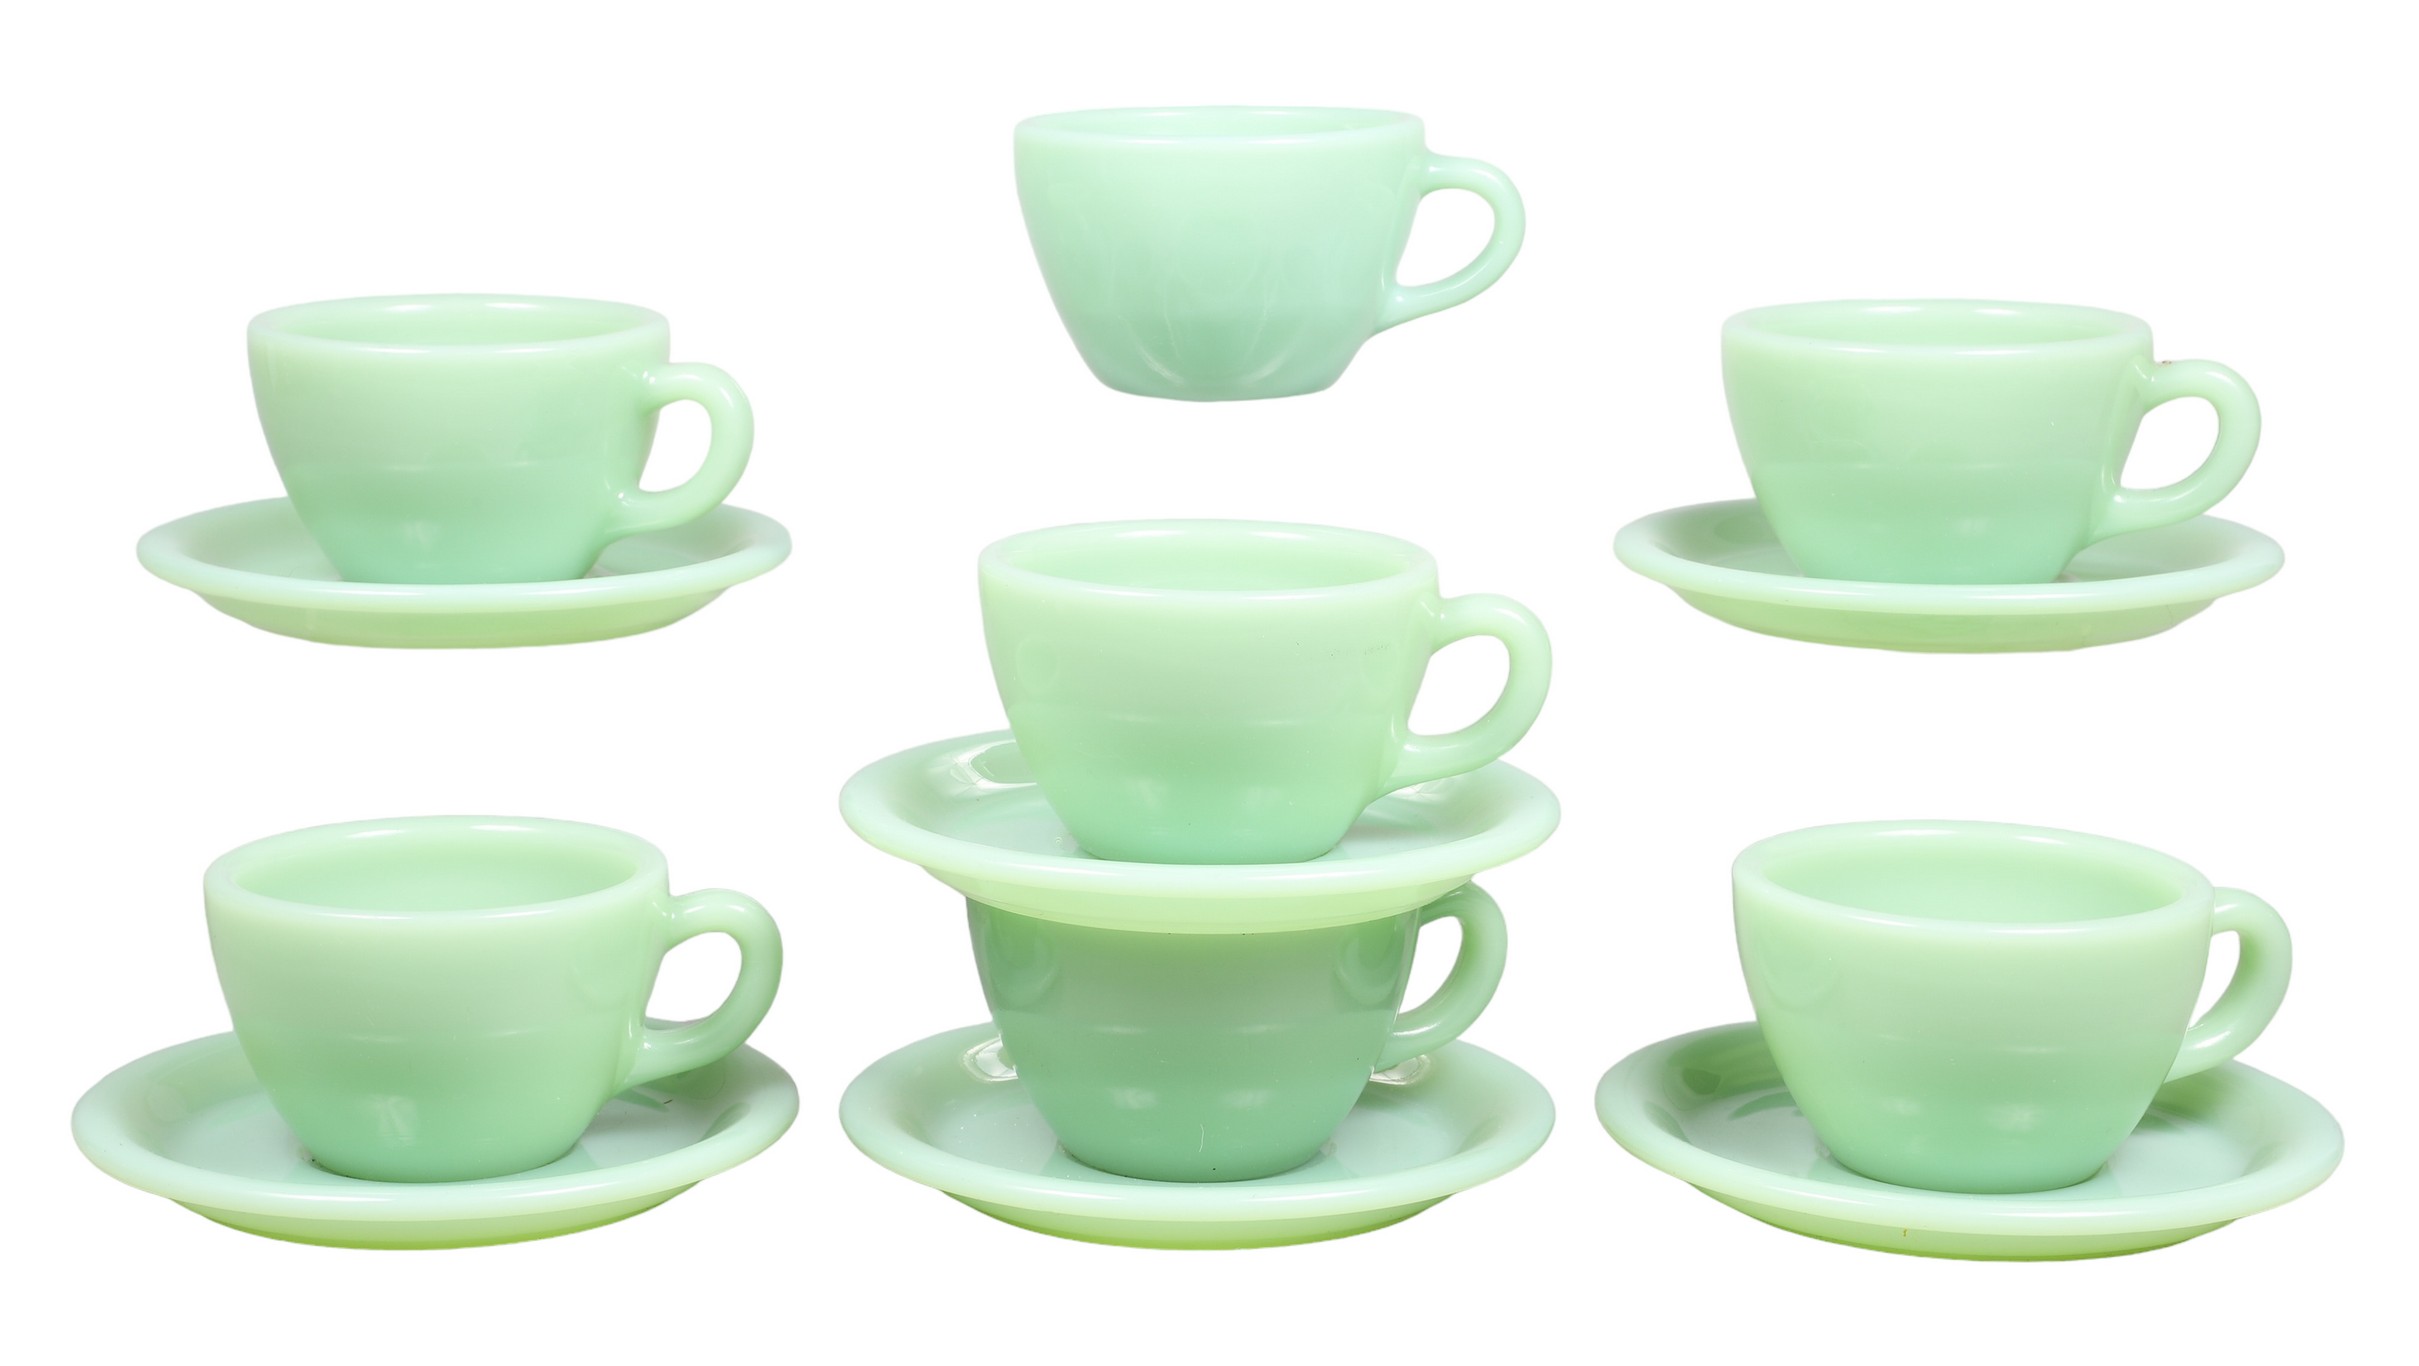 Seven teacups and six saucers of green